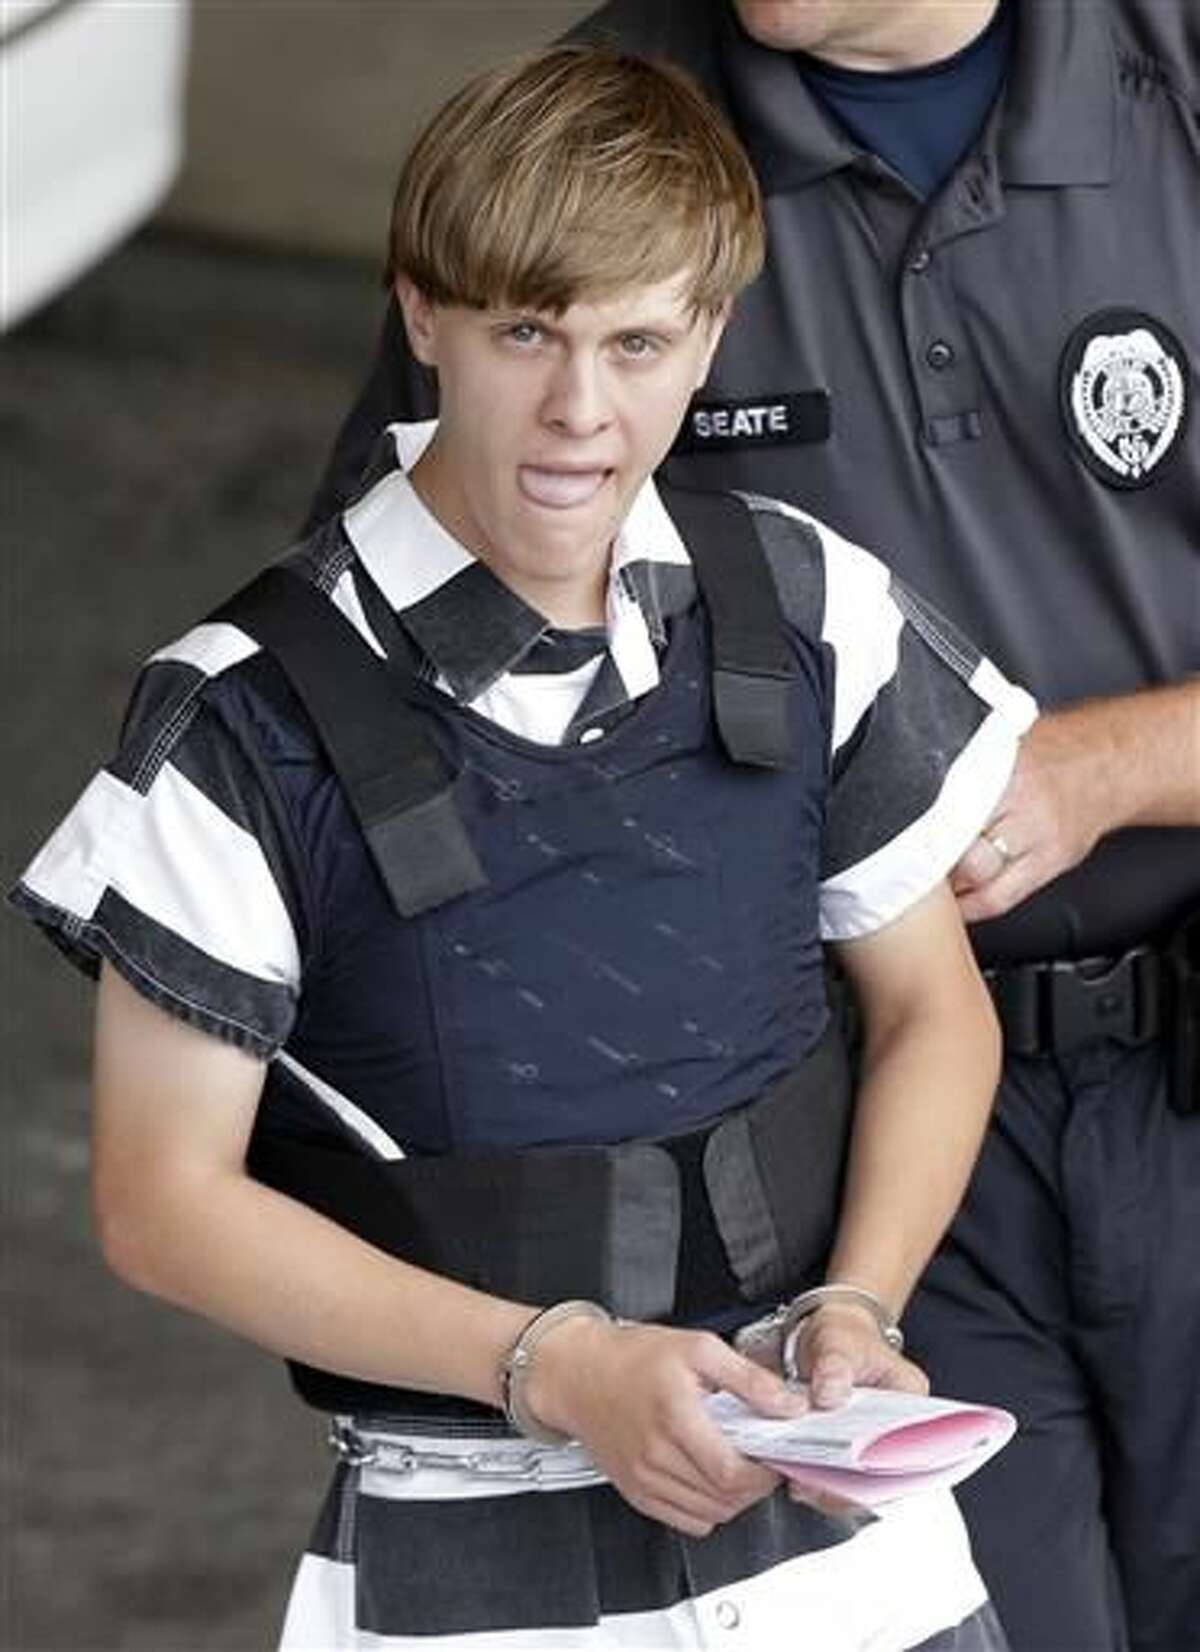 In this Thursday, June 18, 2015, file photo, Charleston, S.C., shooting suspect Dylann Storm Roof is escorted from the Cleveland County Courthouse in Shelby, N.C. After nine black parishioners were slain at a Charleston church, South Carolina did what many thought would never happen: It moved the Confederate flag off Statehouse grounds. (AP Photo/Chuck Burton)